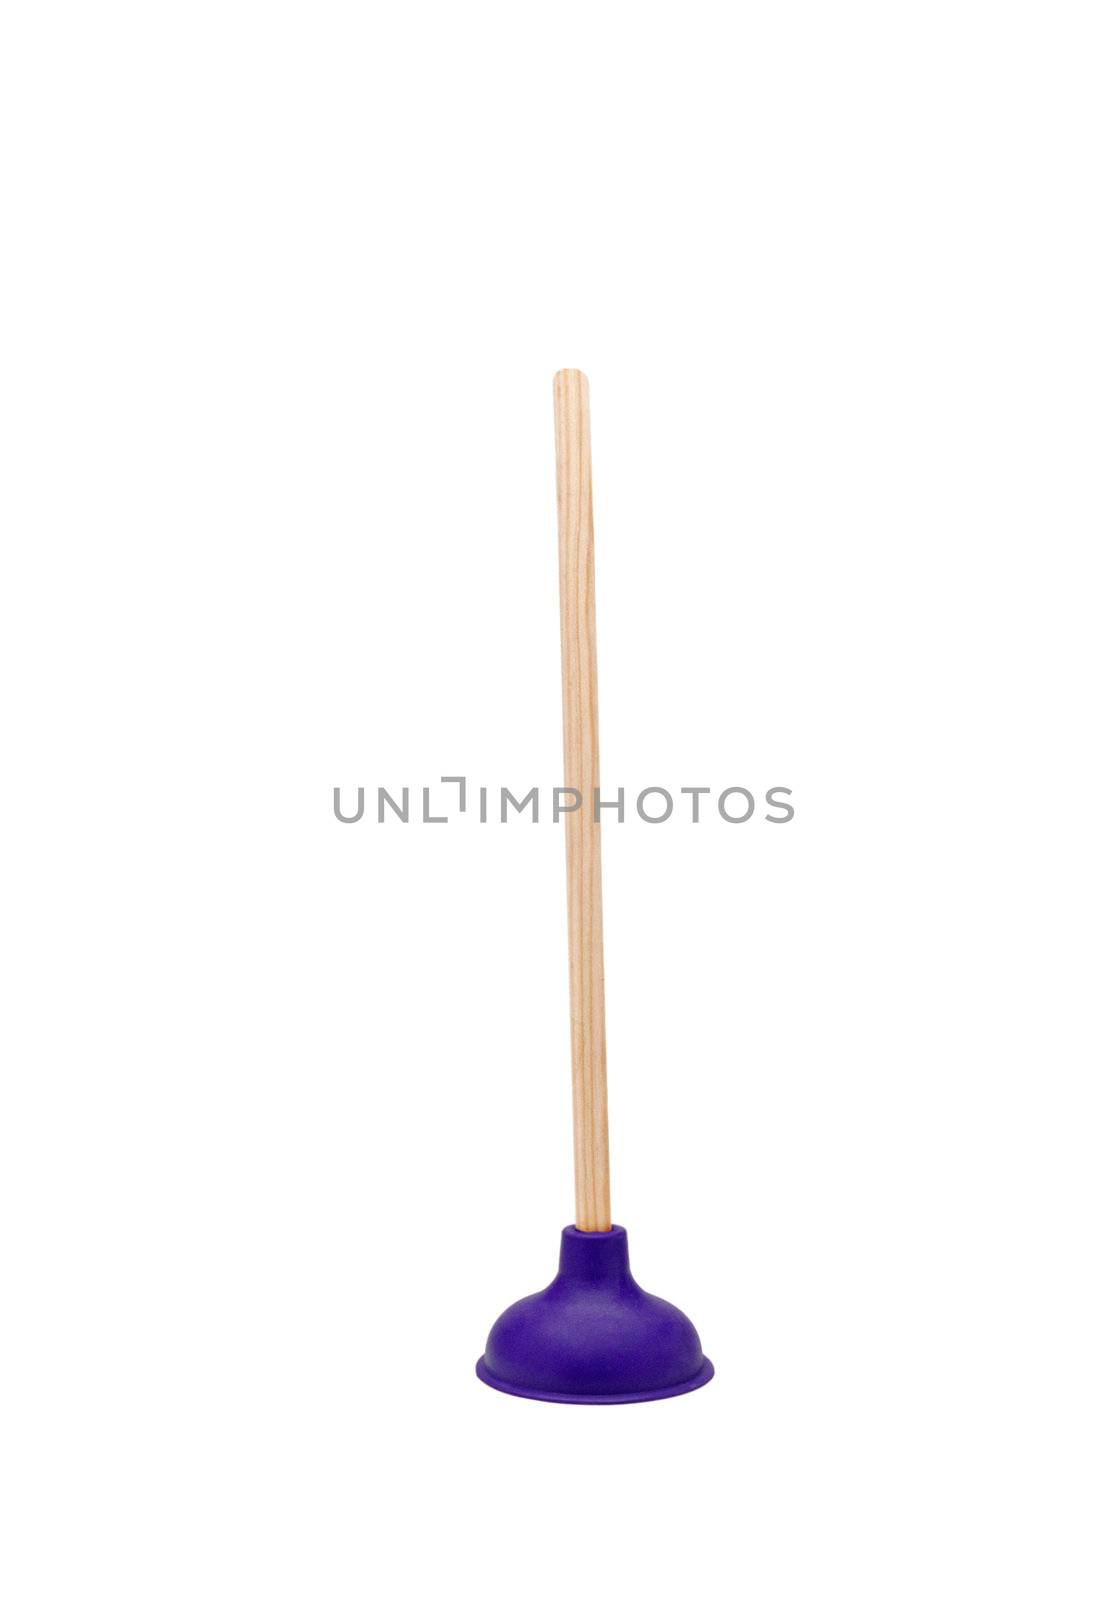 A plunger isolated on white by ozaiachin